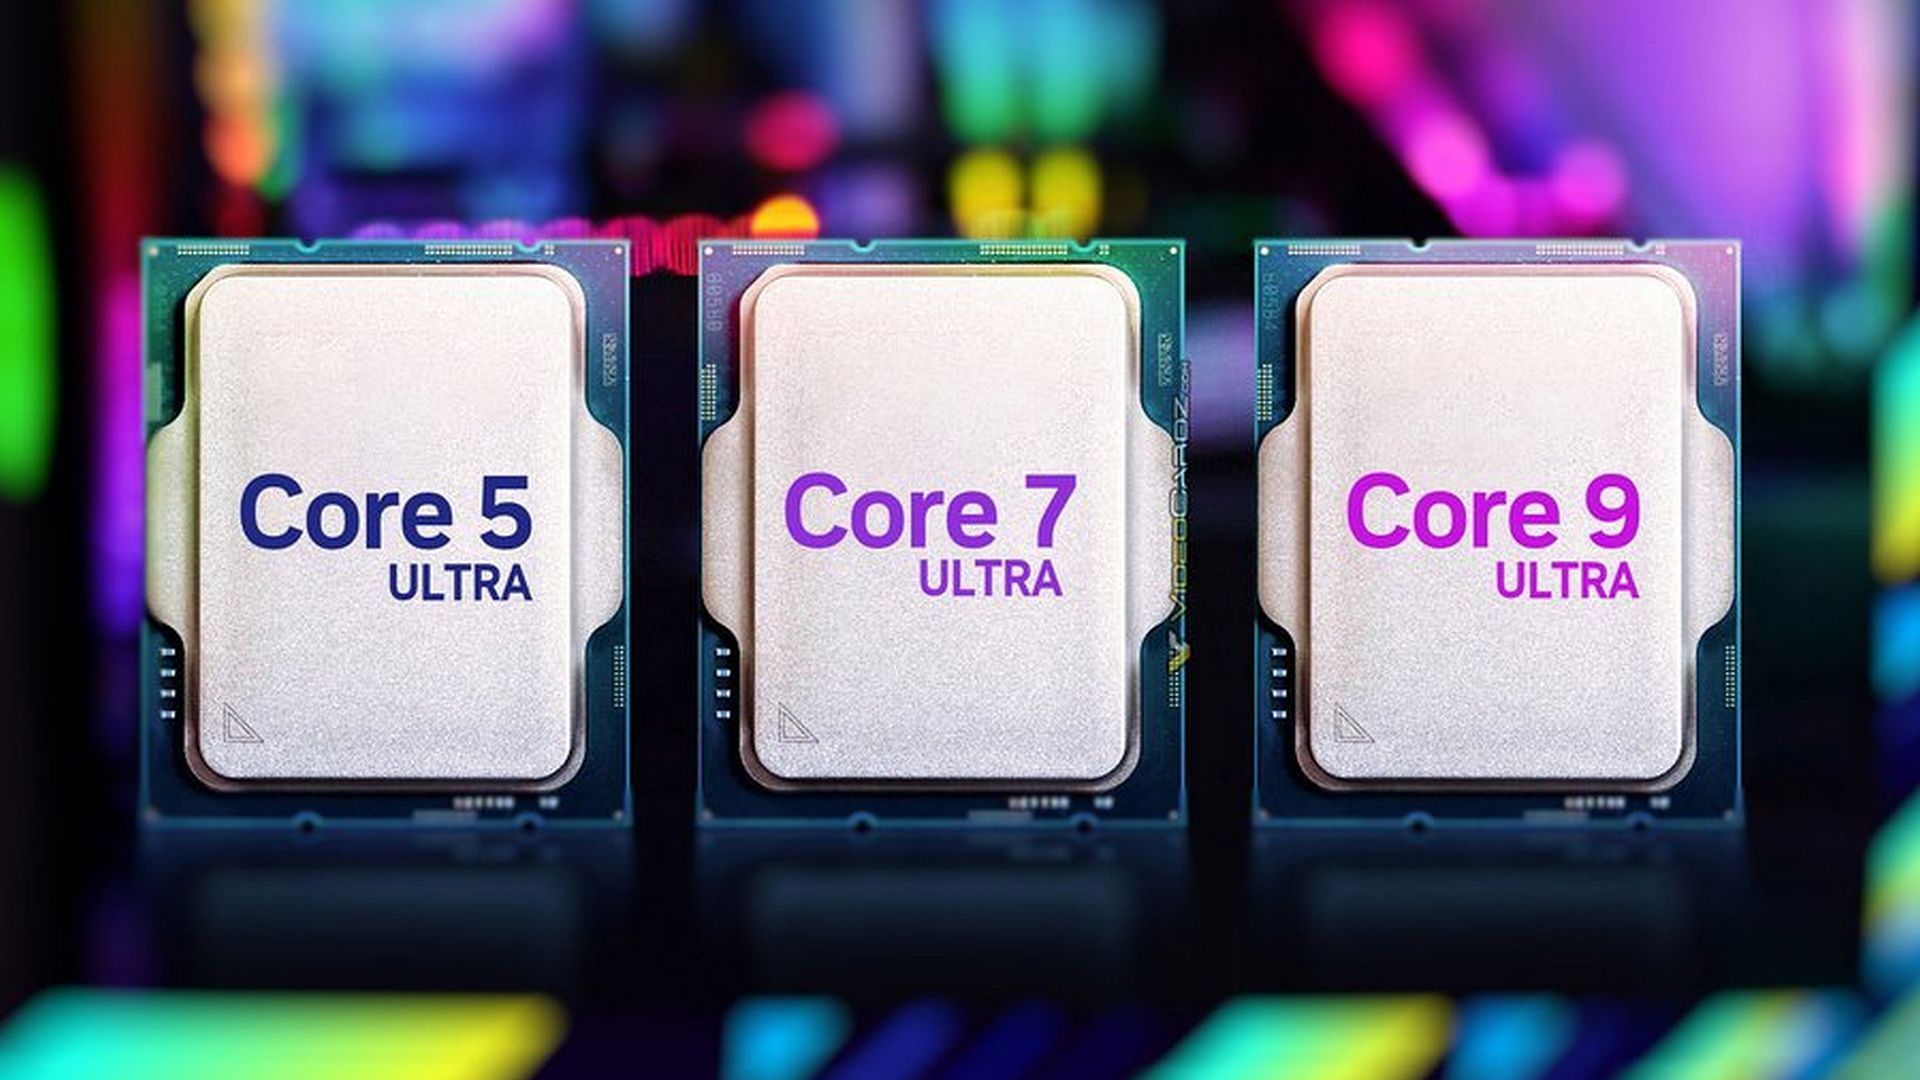 Ultra means better. Intel may change the usual processor labeling